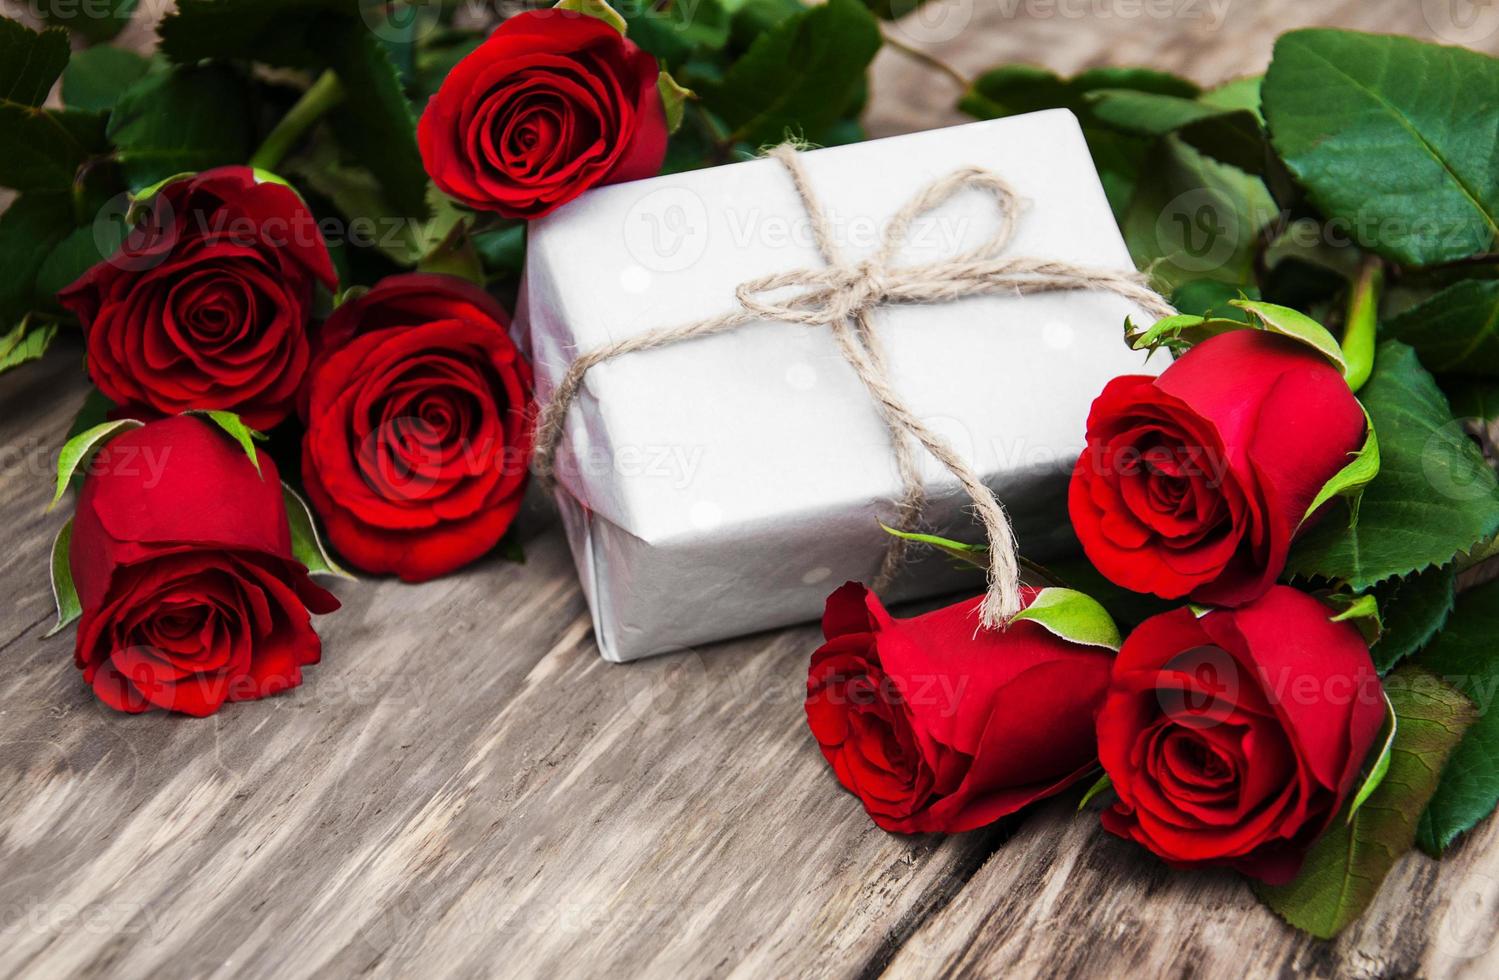 Red roses and gift box photo